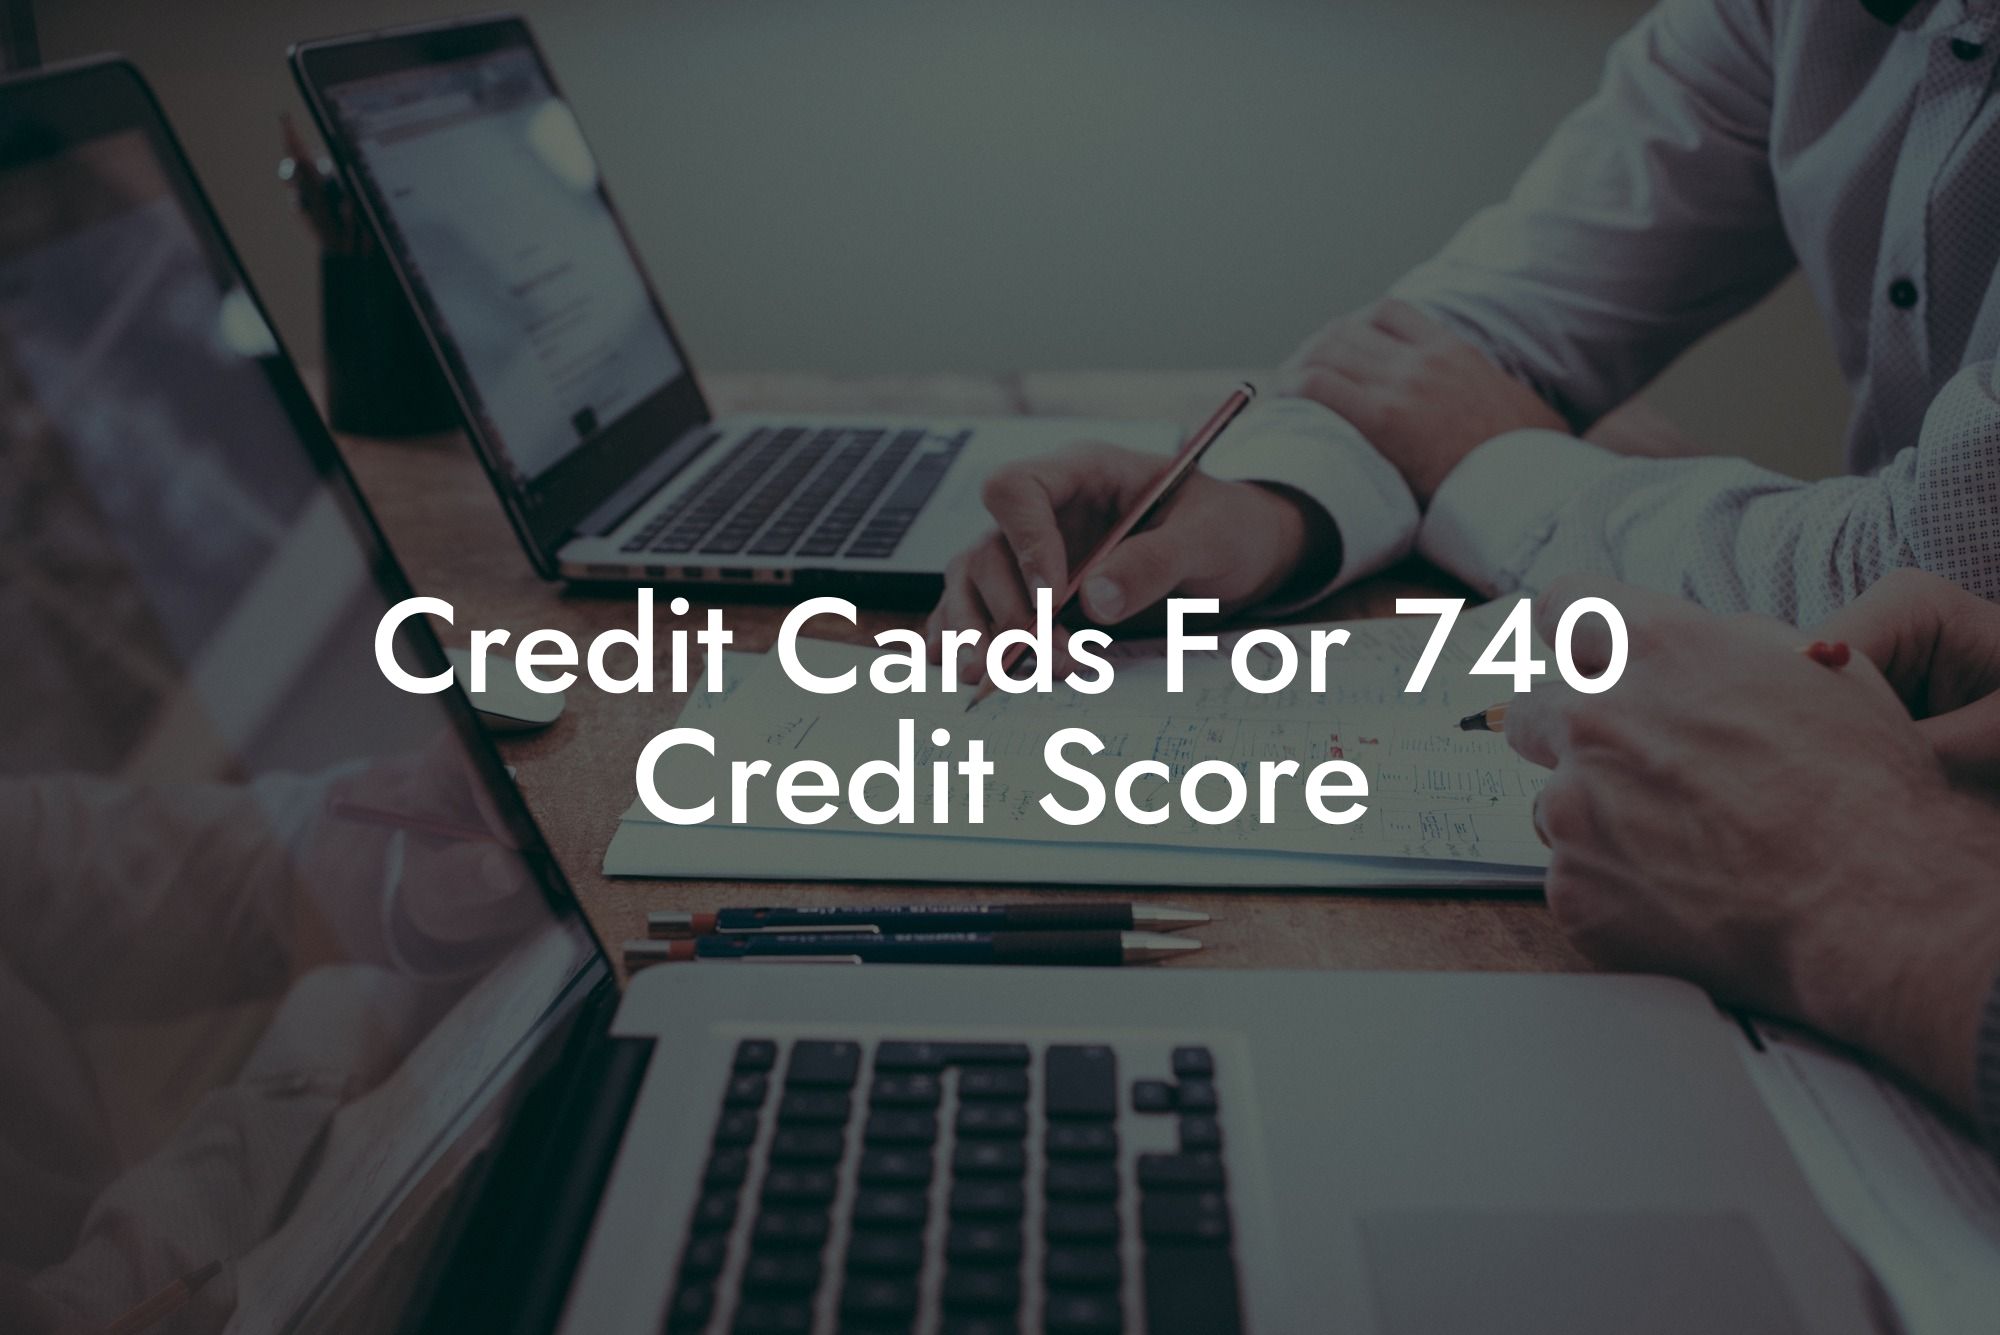 Credit Cards For 740 Credit Score